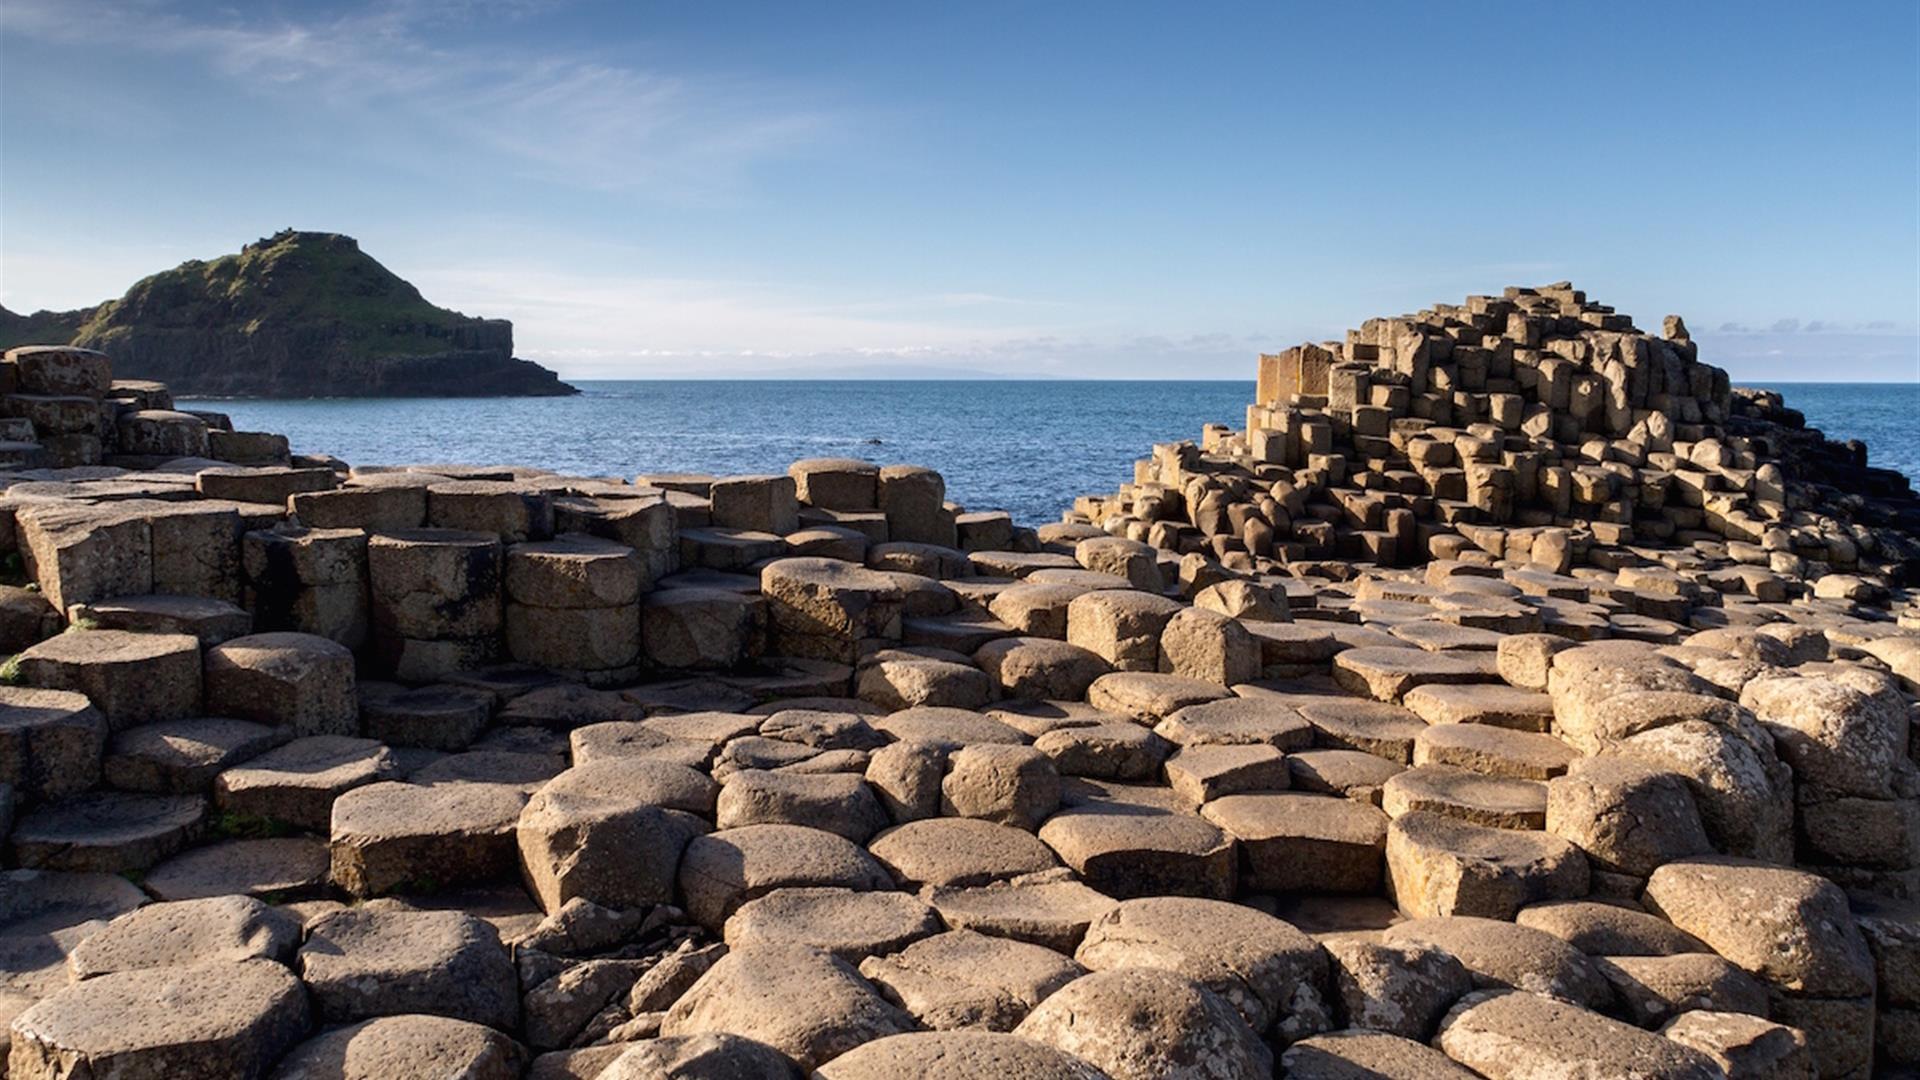 bus tours from belfast to giant's causeway